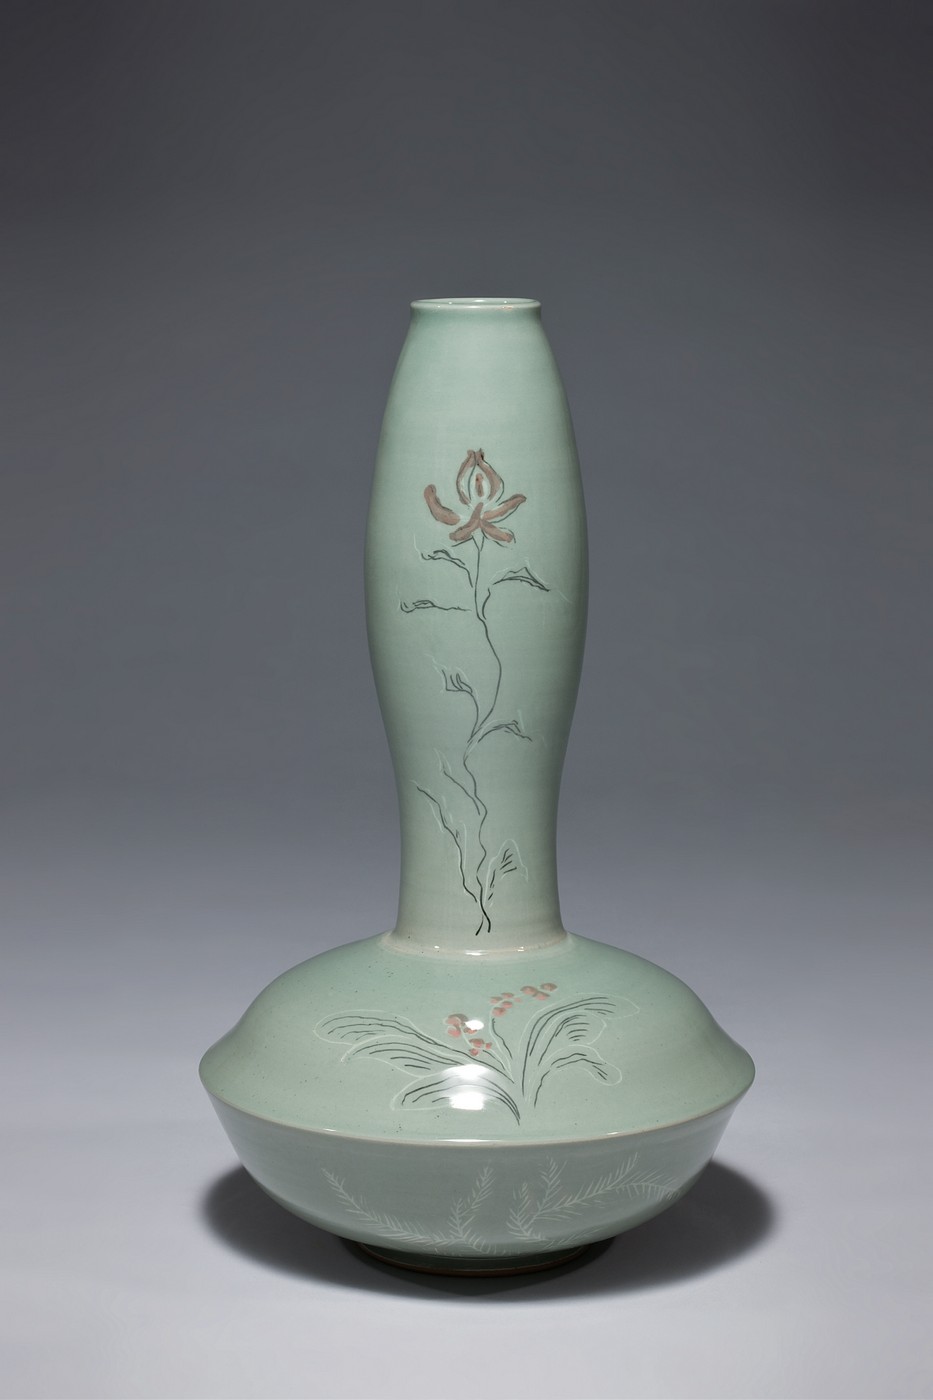 Bottle with Inlaid Flowers Design